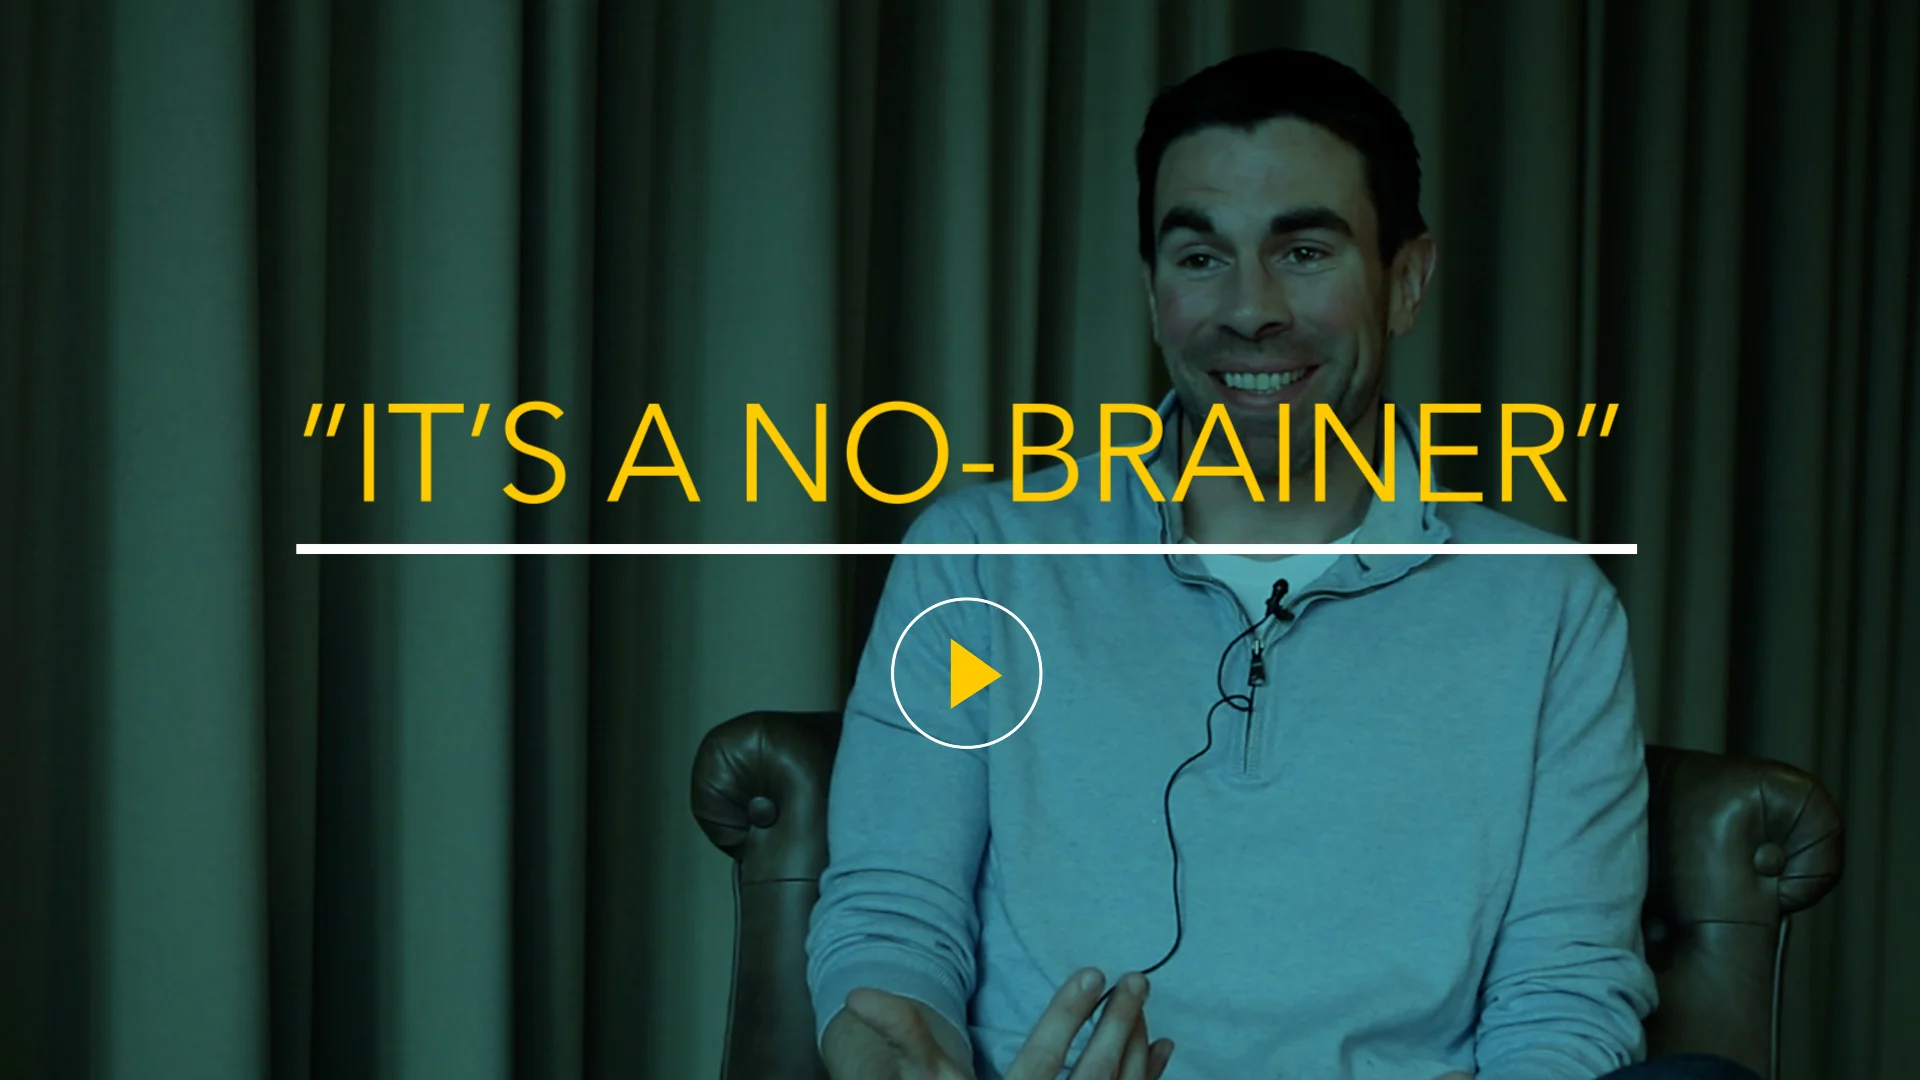 It's-a-No-Brainer.mp4 on Vimeo